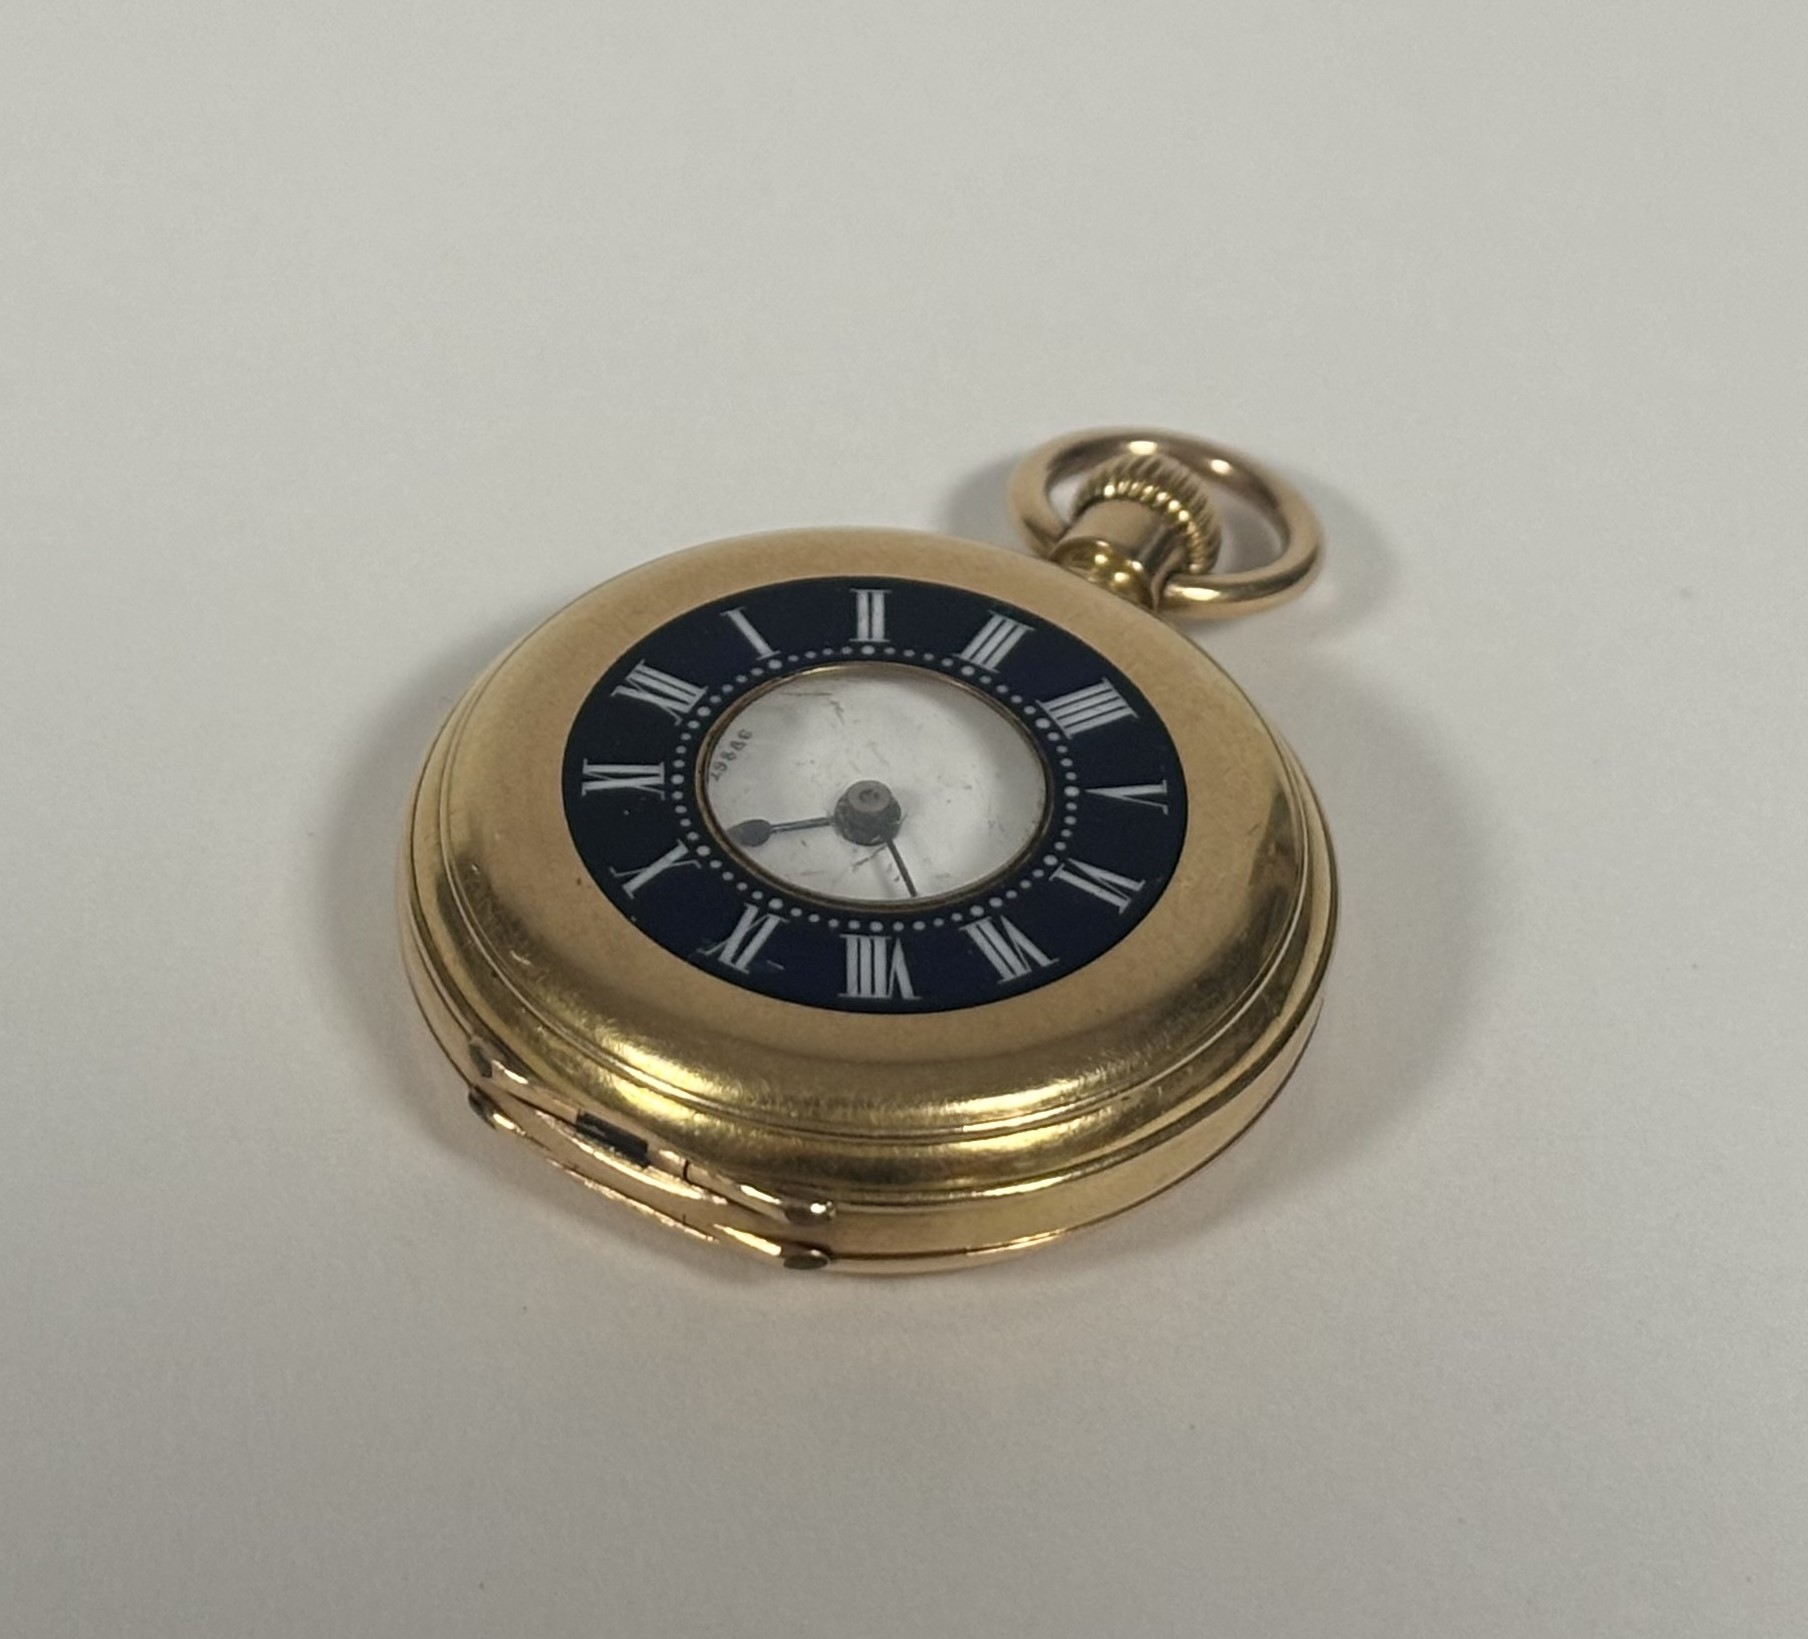 An 18ct gold and enamel small half-hunter fob watch, late 19th century